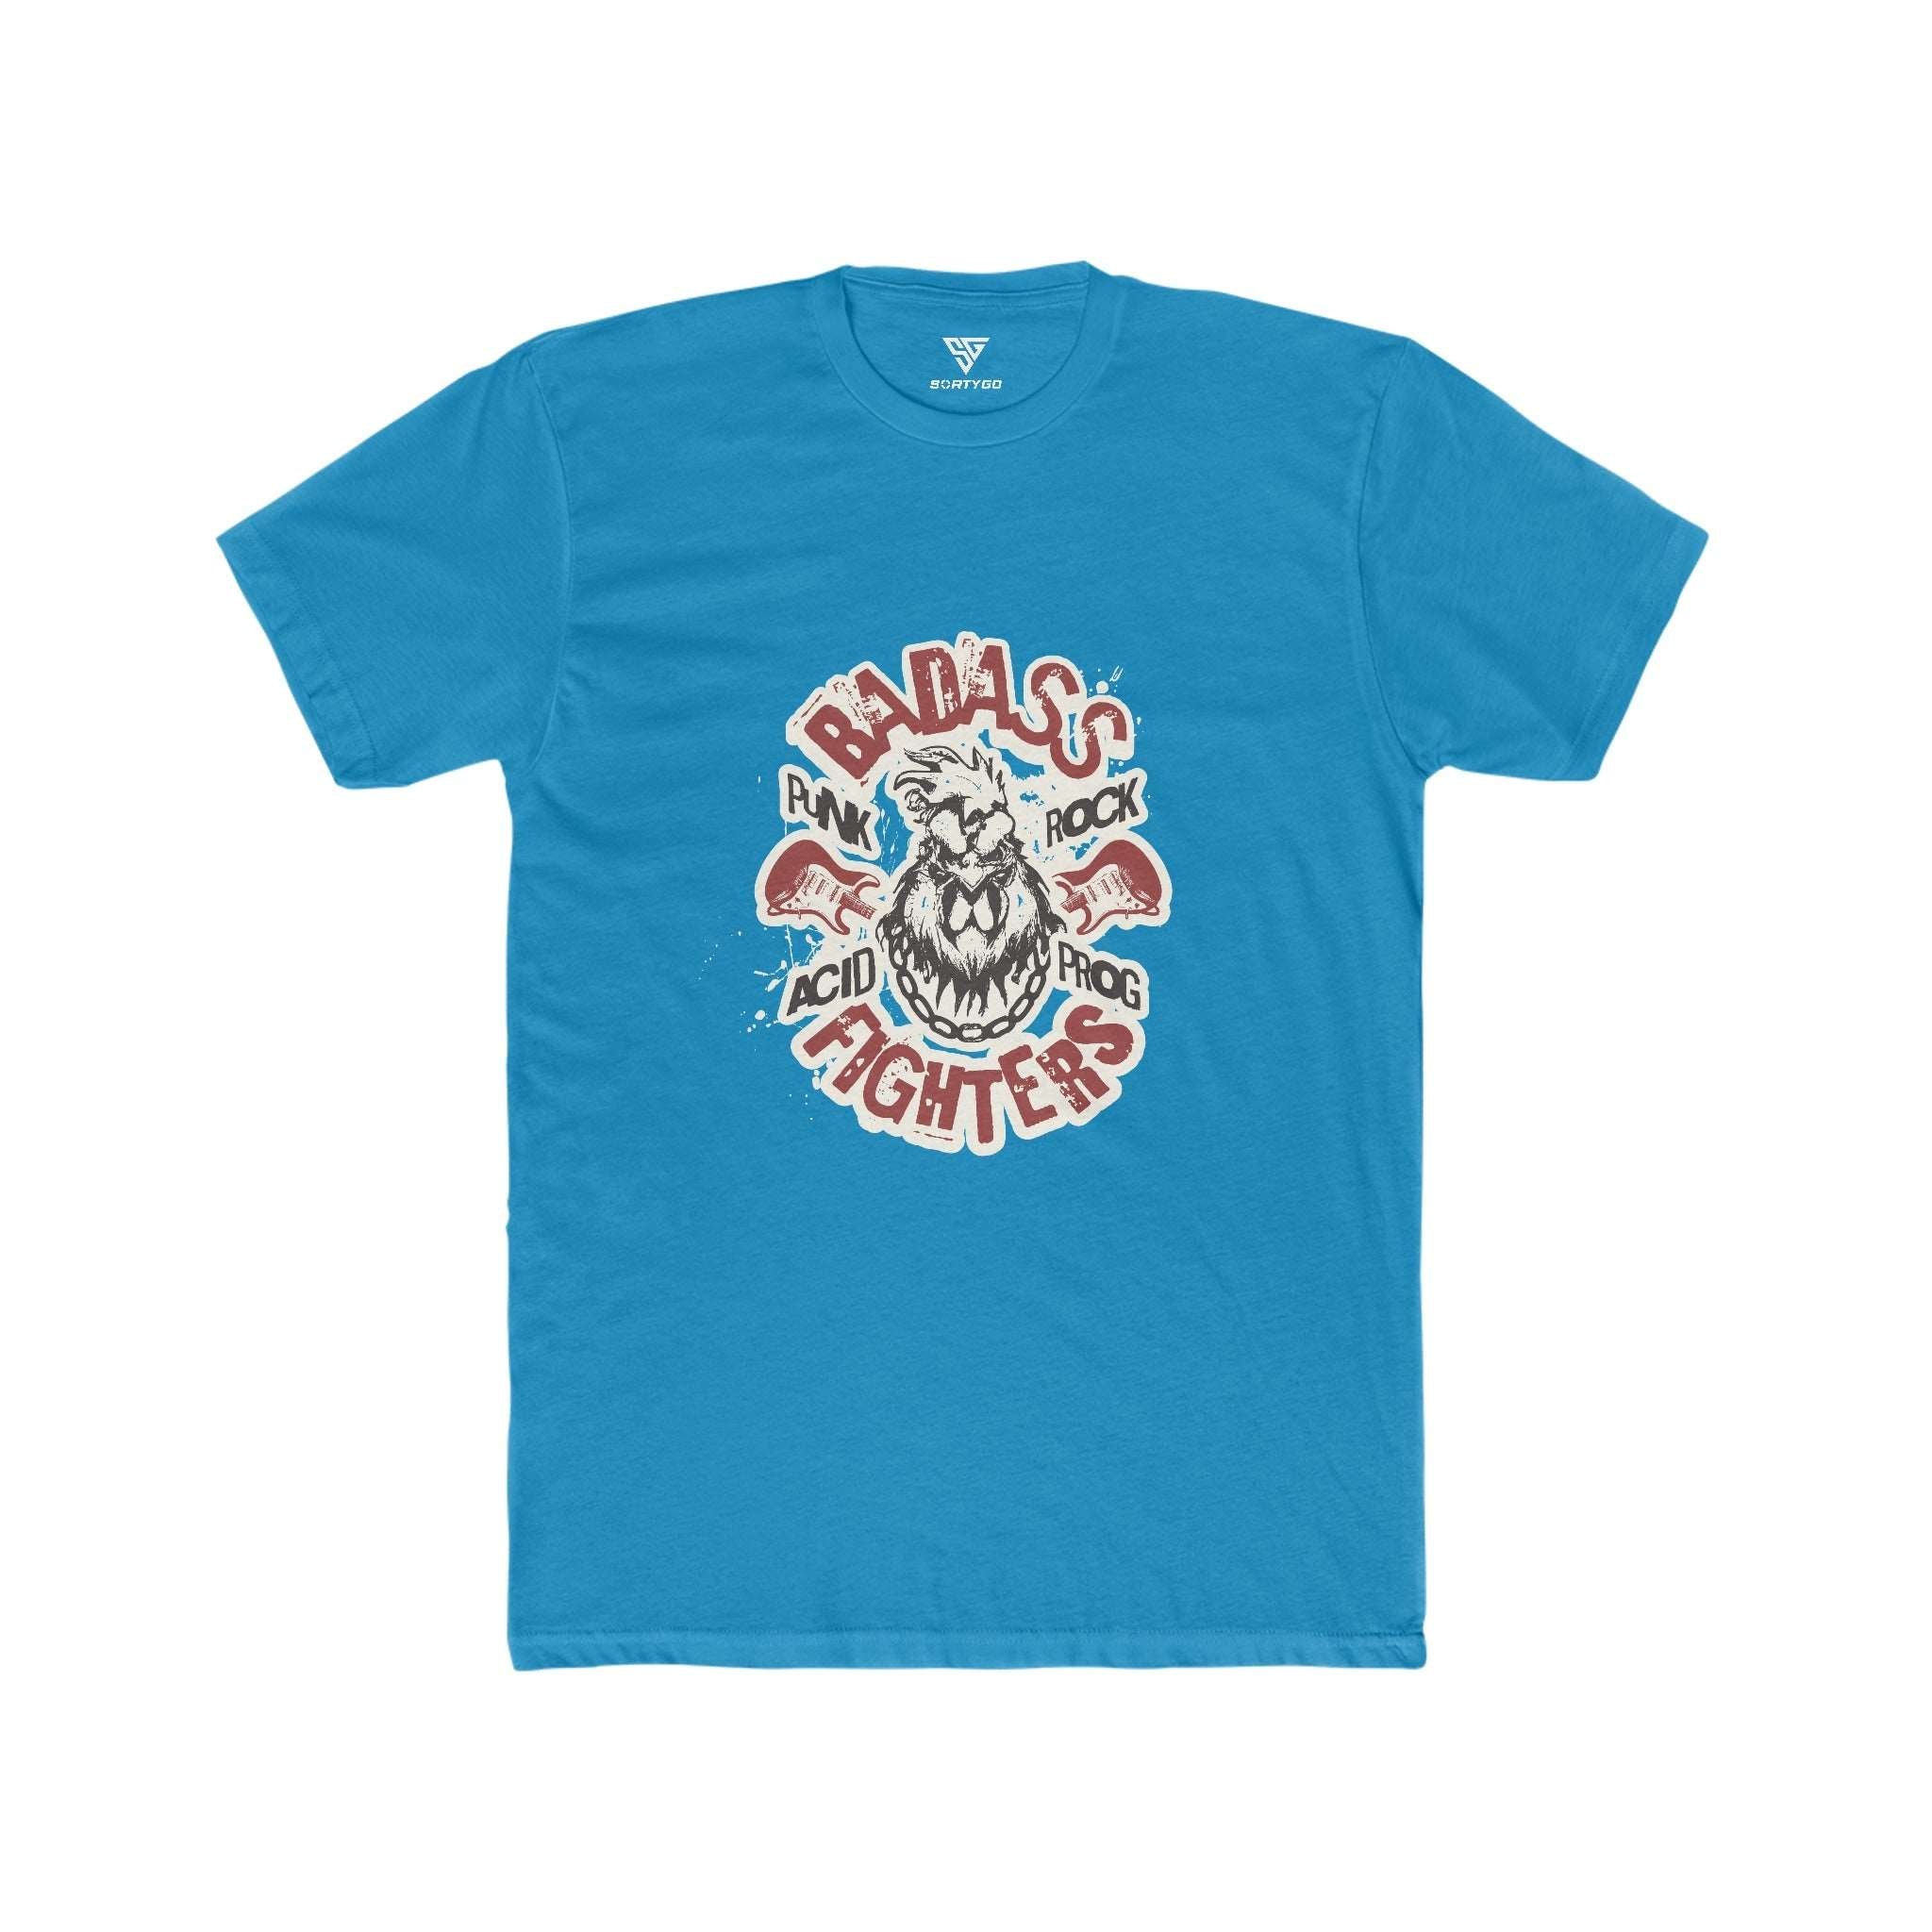 SORTYGO - Badass Fighters Men Fitted T-Shirt in Solid Turquoise